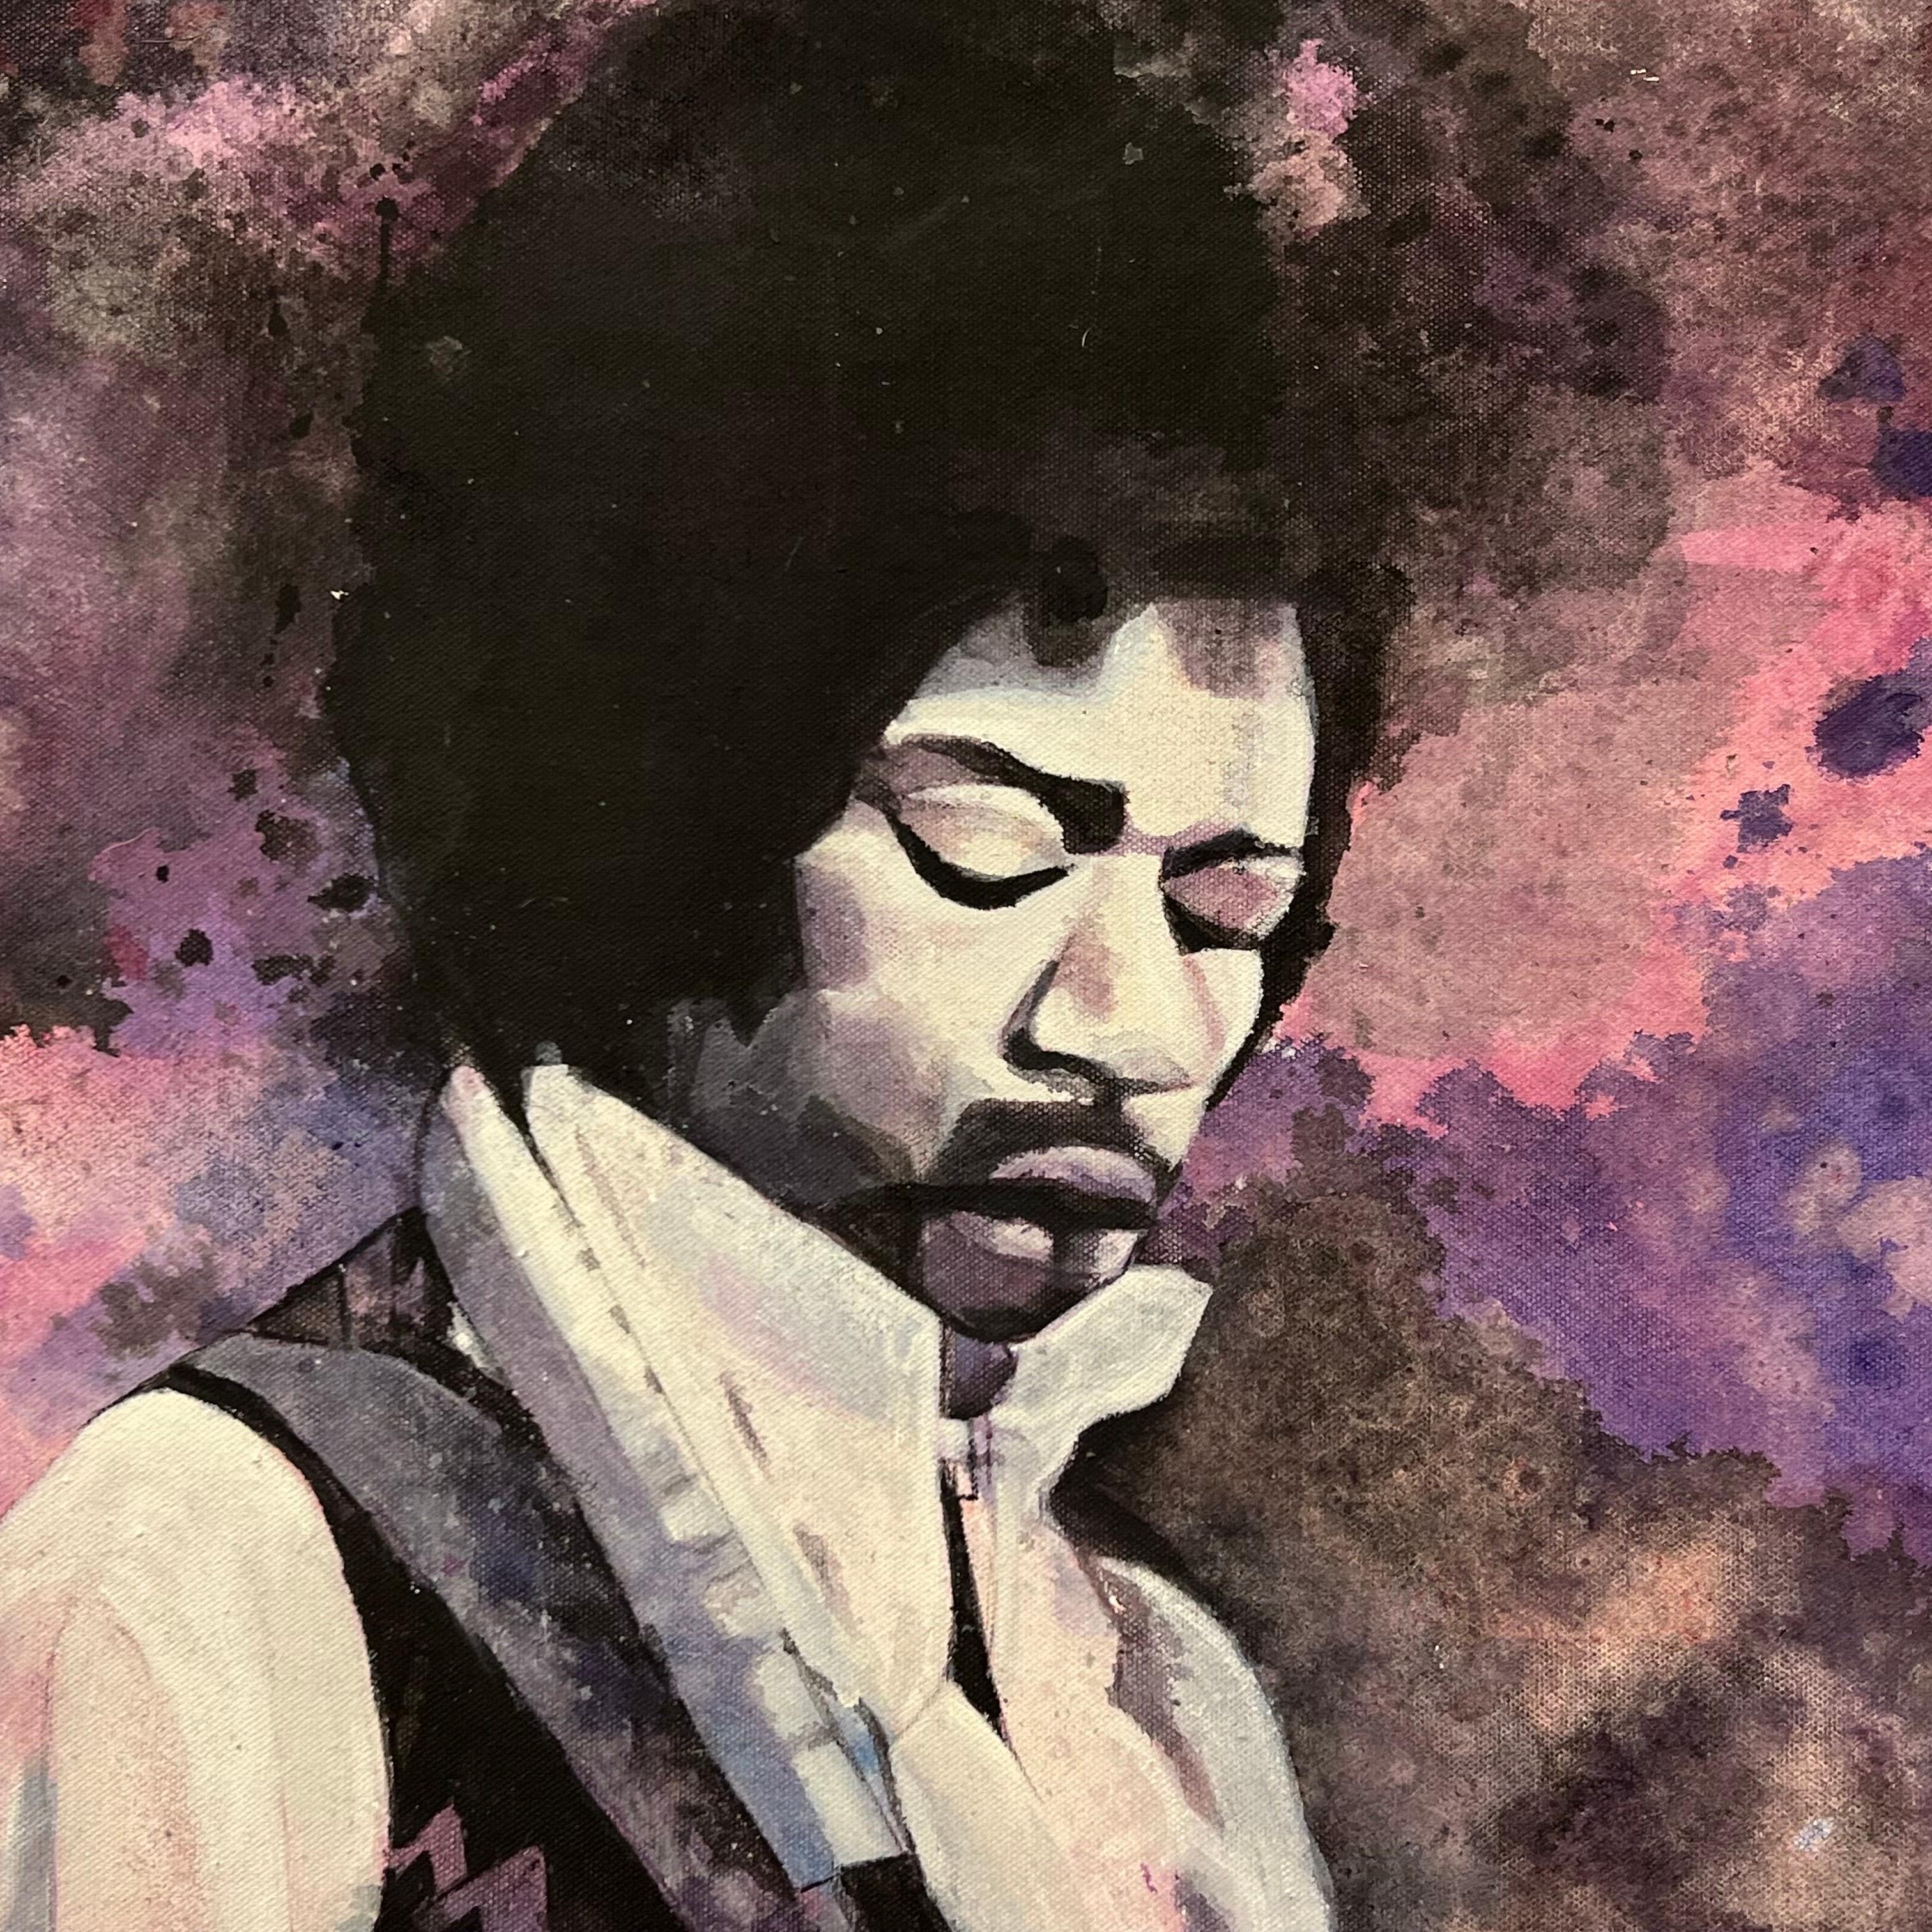 Jimmy Hendrix Portrait Playing Guitar on Purple Ink & Tie Dye Canvas by British Artist

36 x 36 inches 